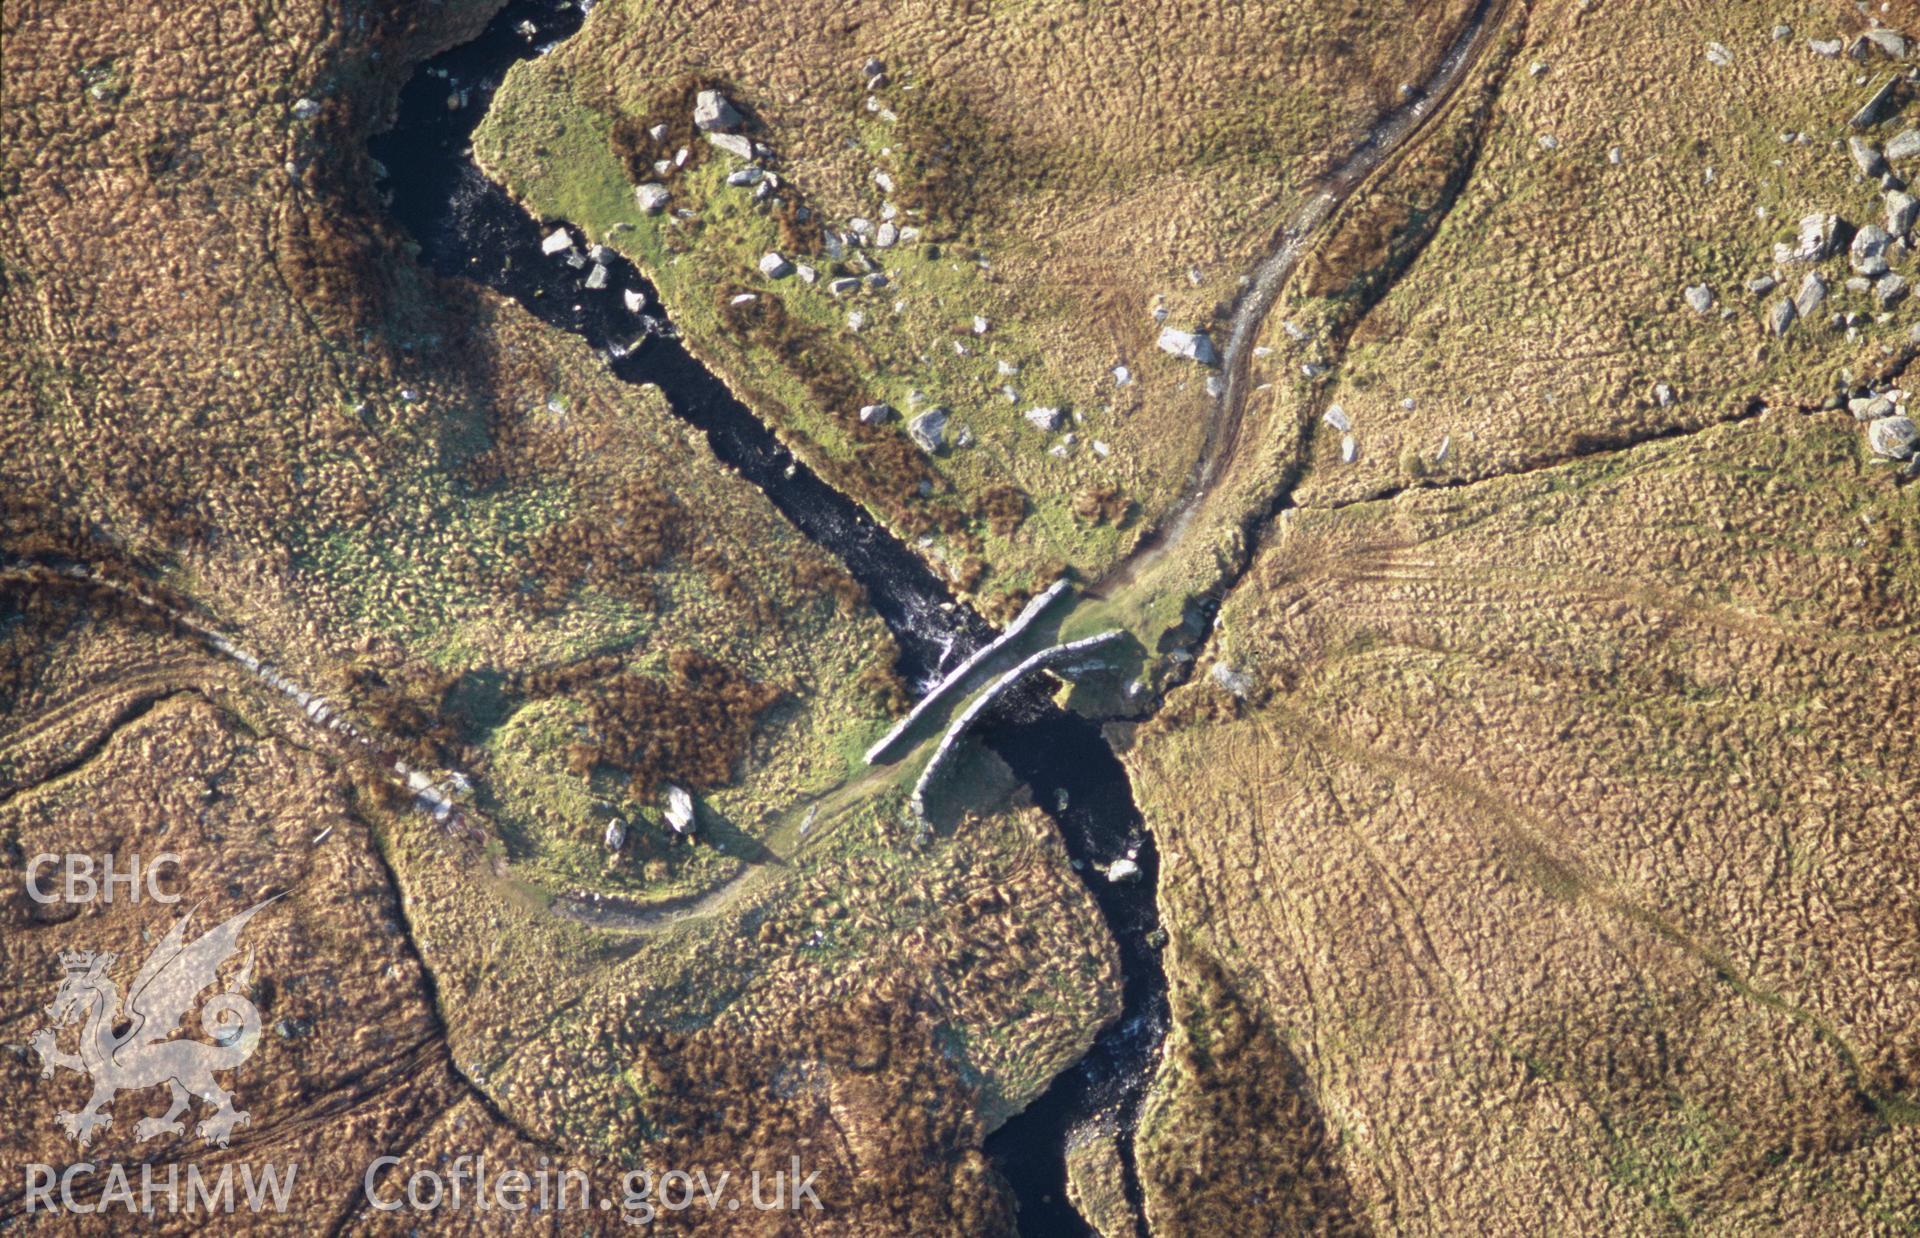 Slide of RCAHMW colour oblique aerial photograph of Pont Scethin, Dyffryn Ardudwy, taken by T.G. Driver, 2005.